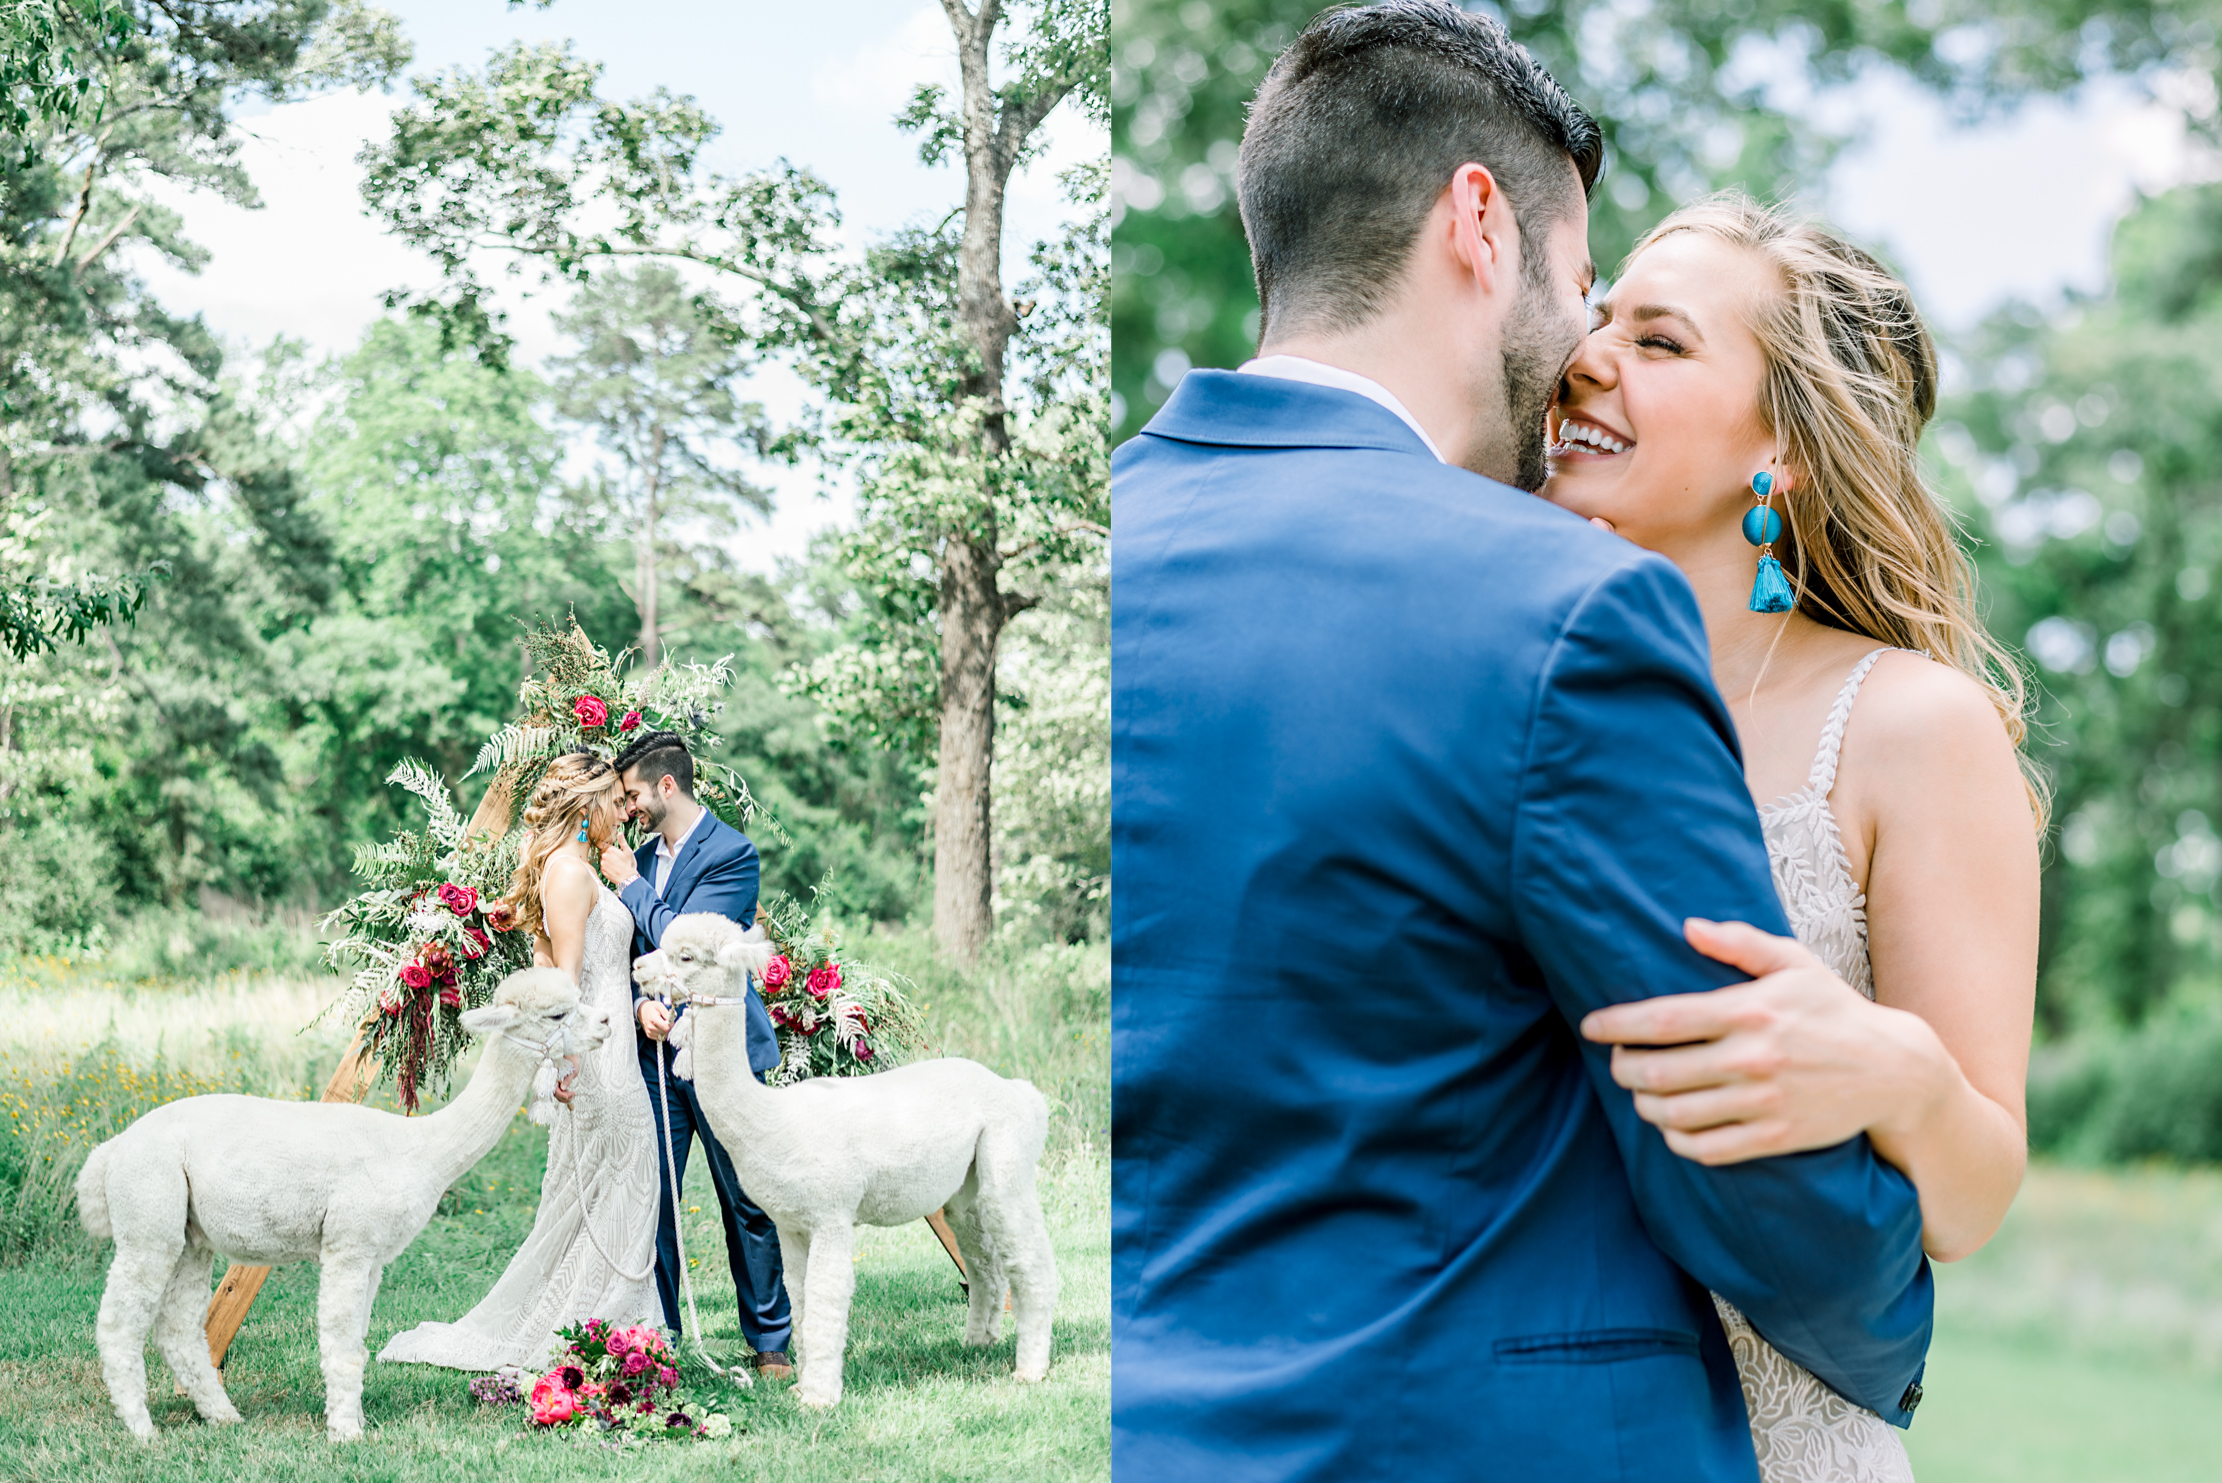 Emily & Nico | The Meekermark | Jessica Lucile Photography